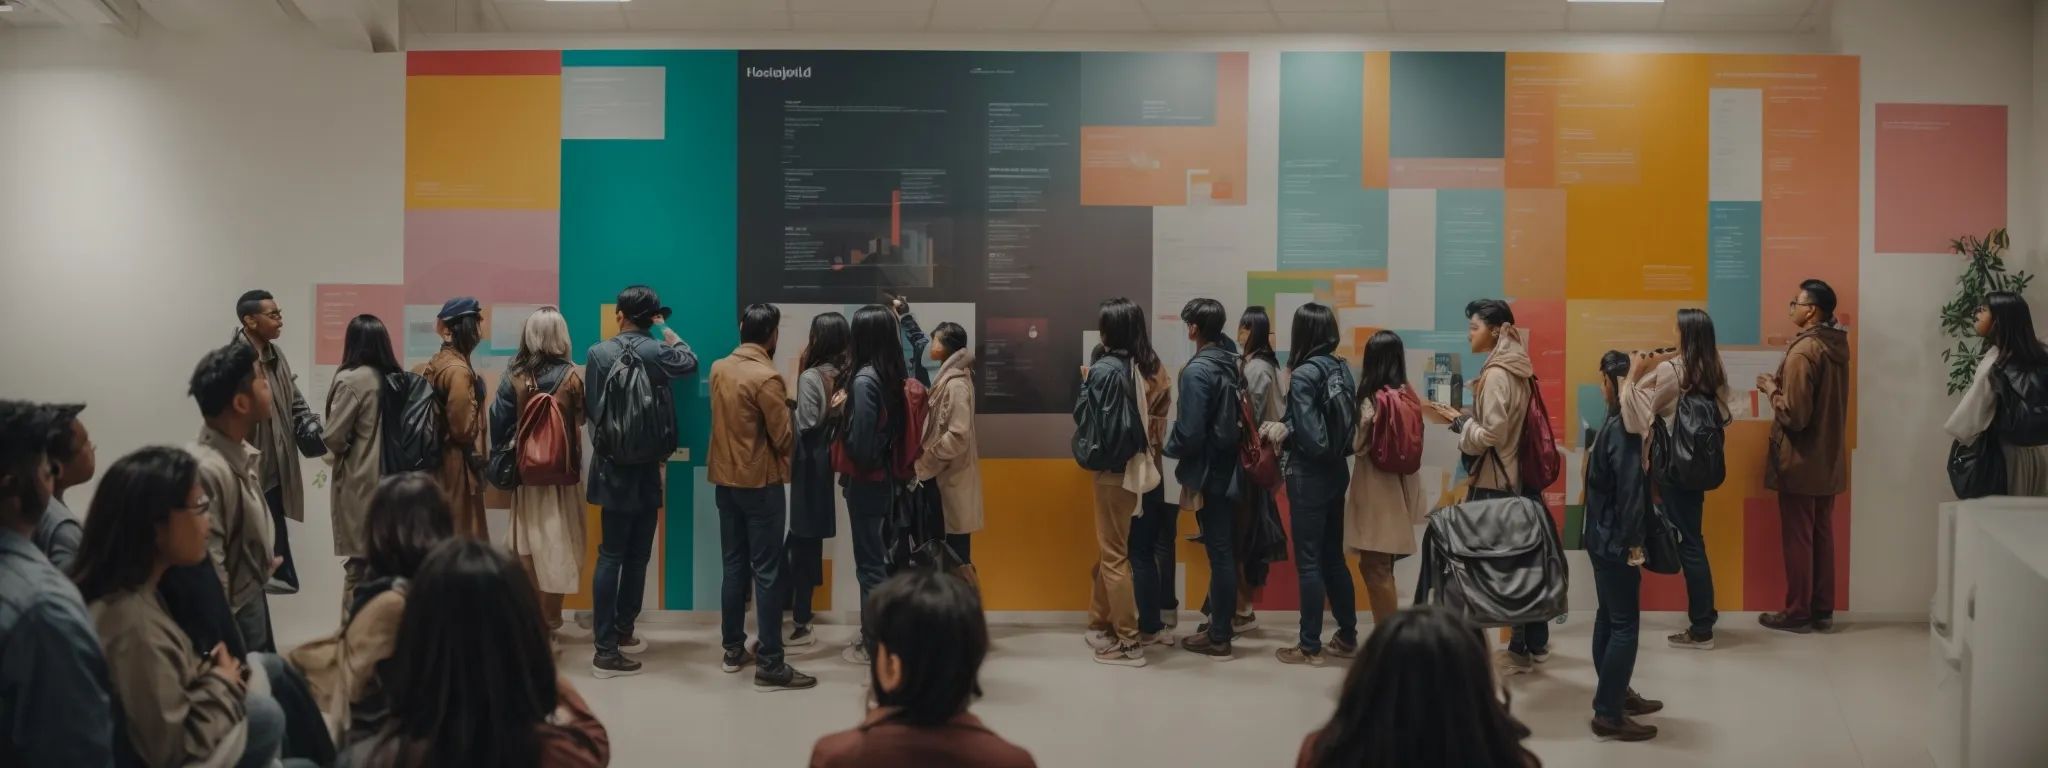 a diverse group of people gathered around a large, colorful infographic displayed on a wall, actively discussing its content.